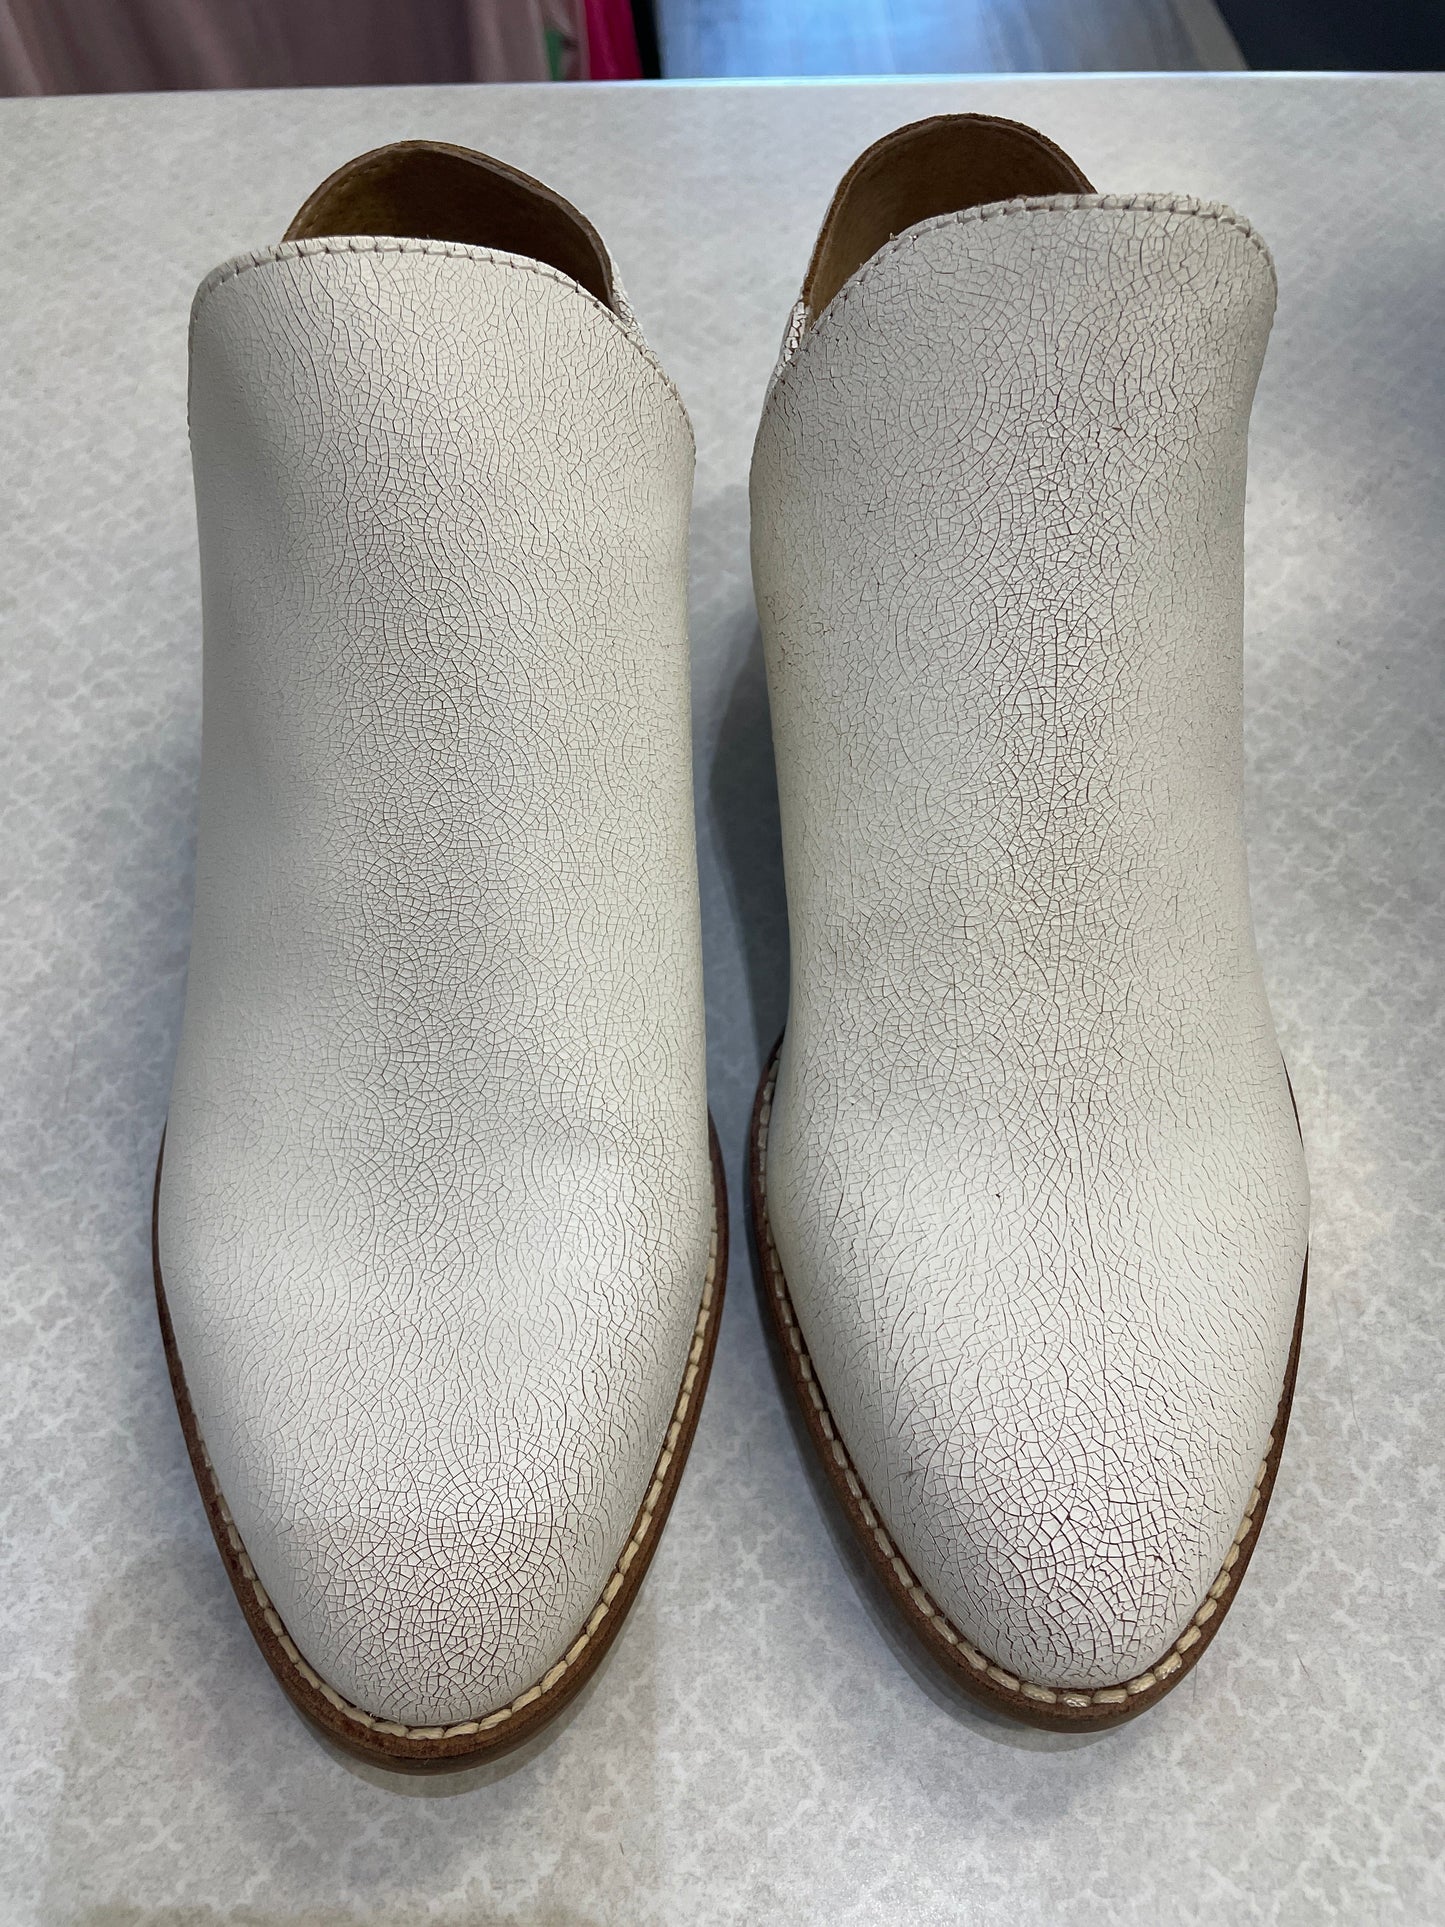 White Shoes Heels Block Lucky Brand, Size 9